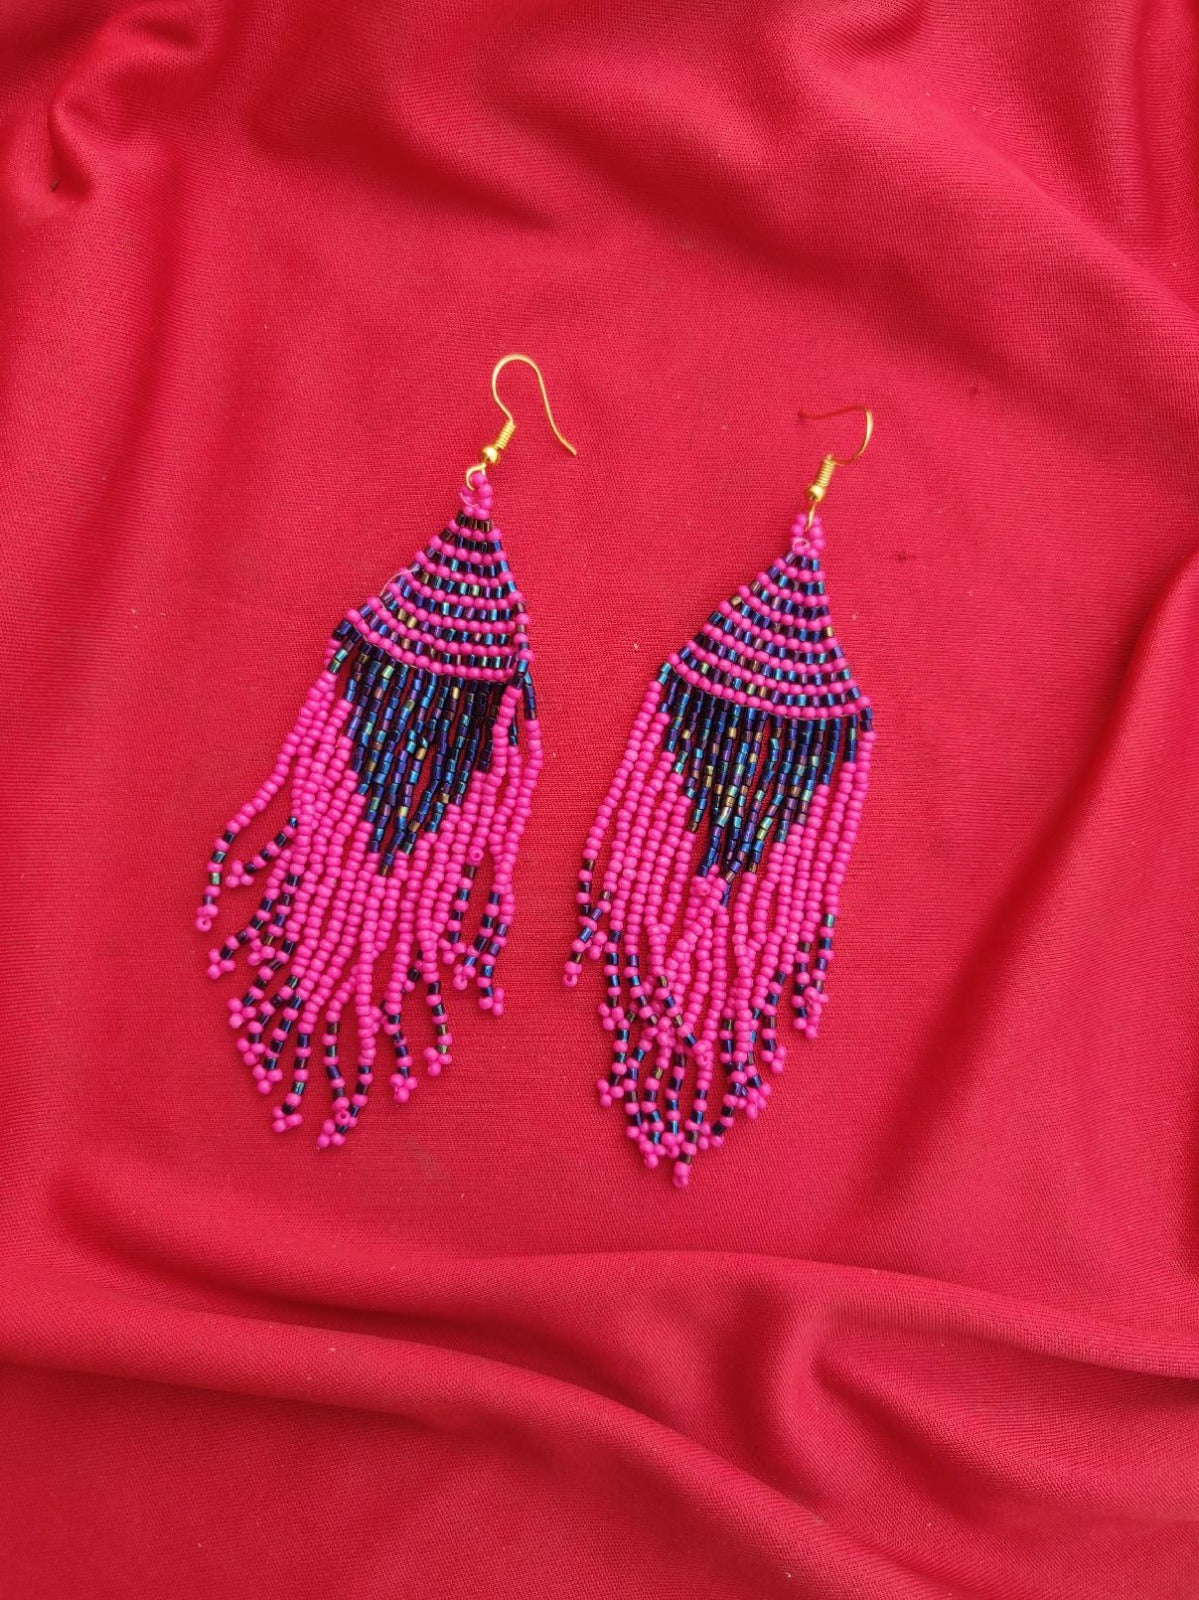 Beads danglers in pink and blue colour